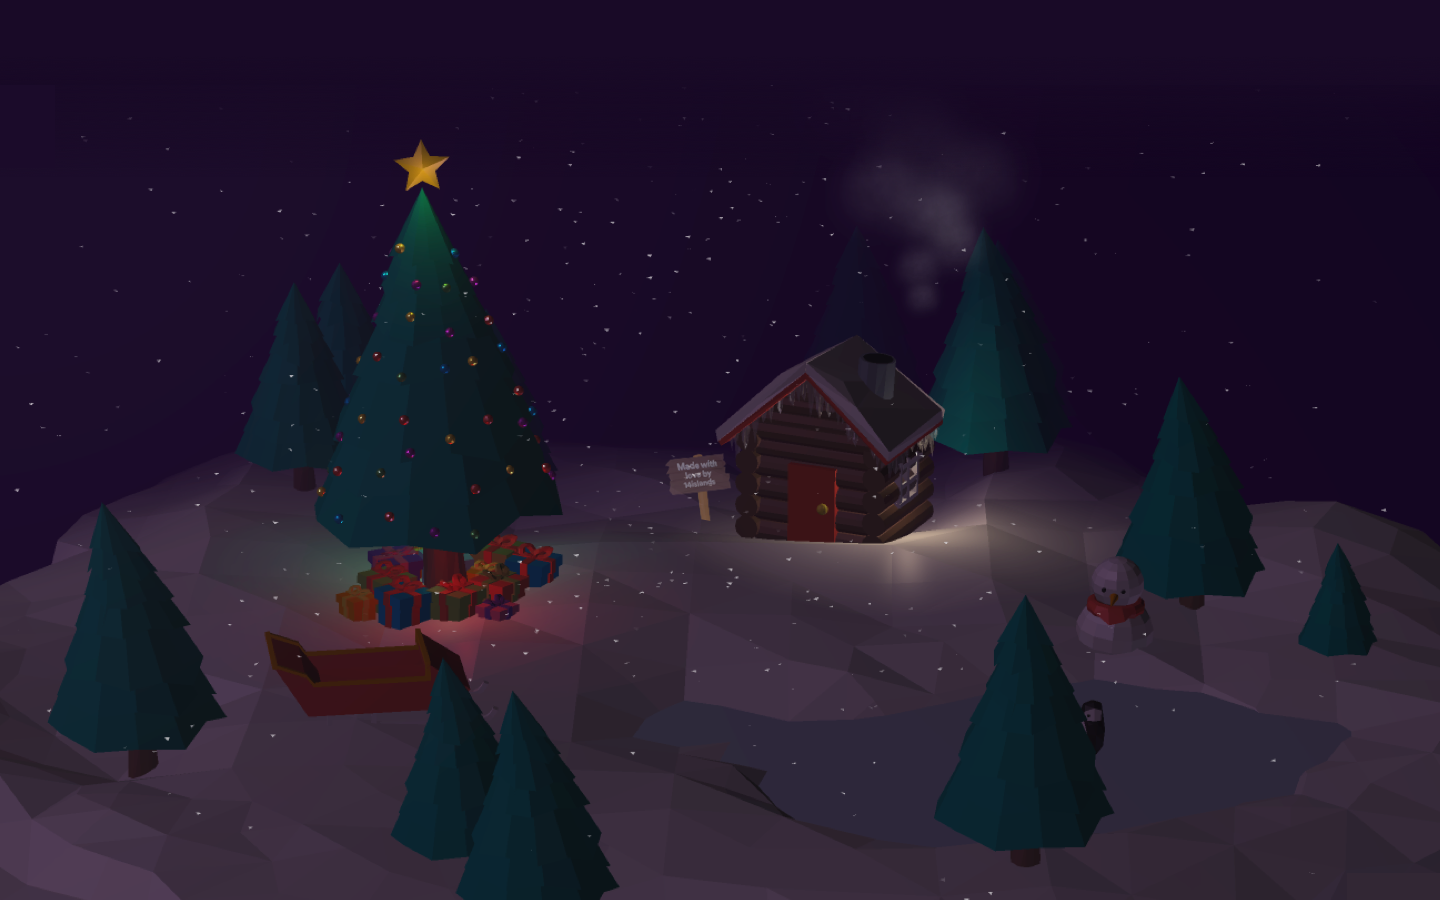 How we crafted a playful digital Christmas card in 3D on the web. by Hjörtur Hilmarssonislands